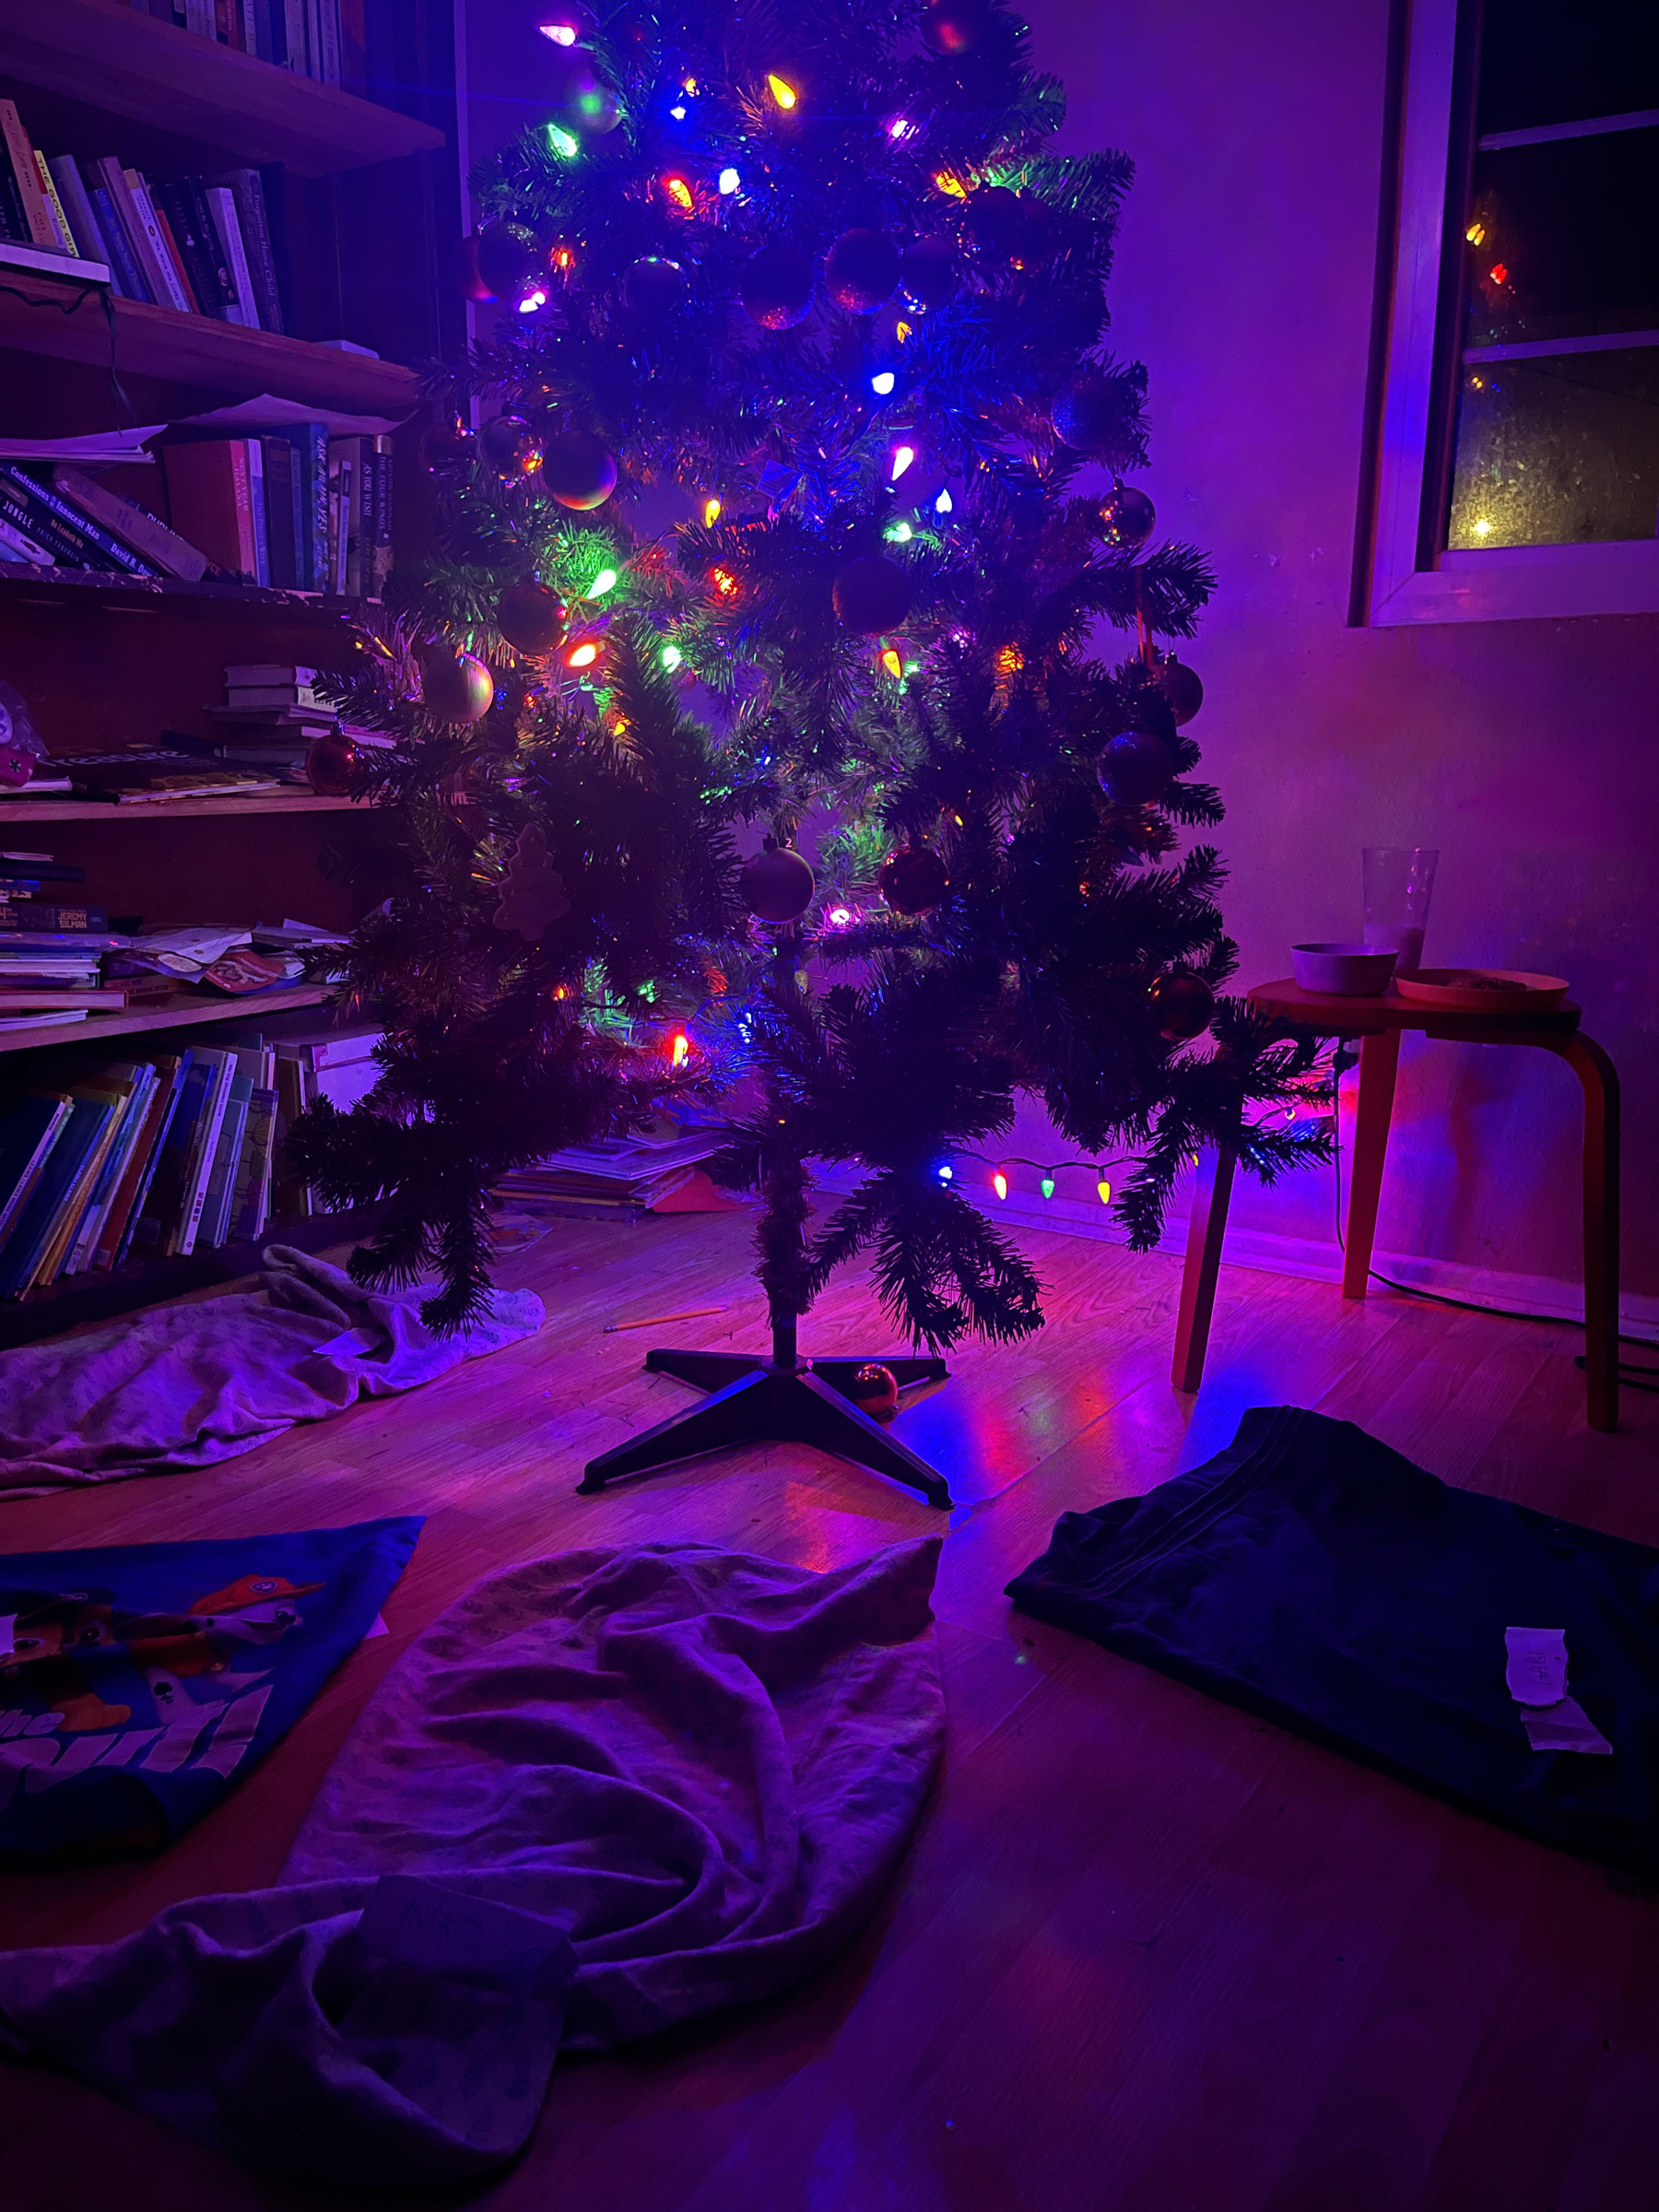 Christmas tree in the dark without any presents under the tree